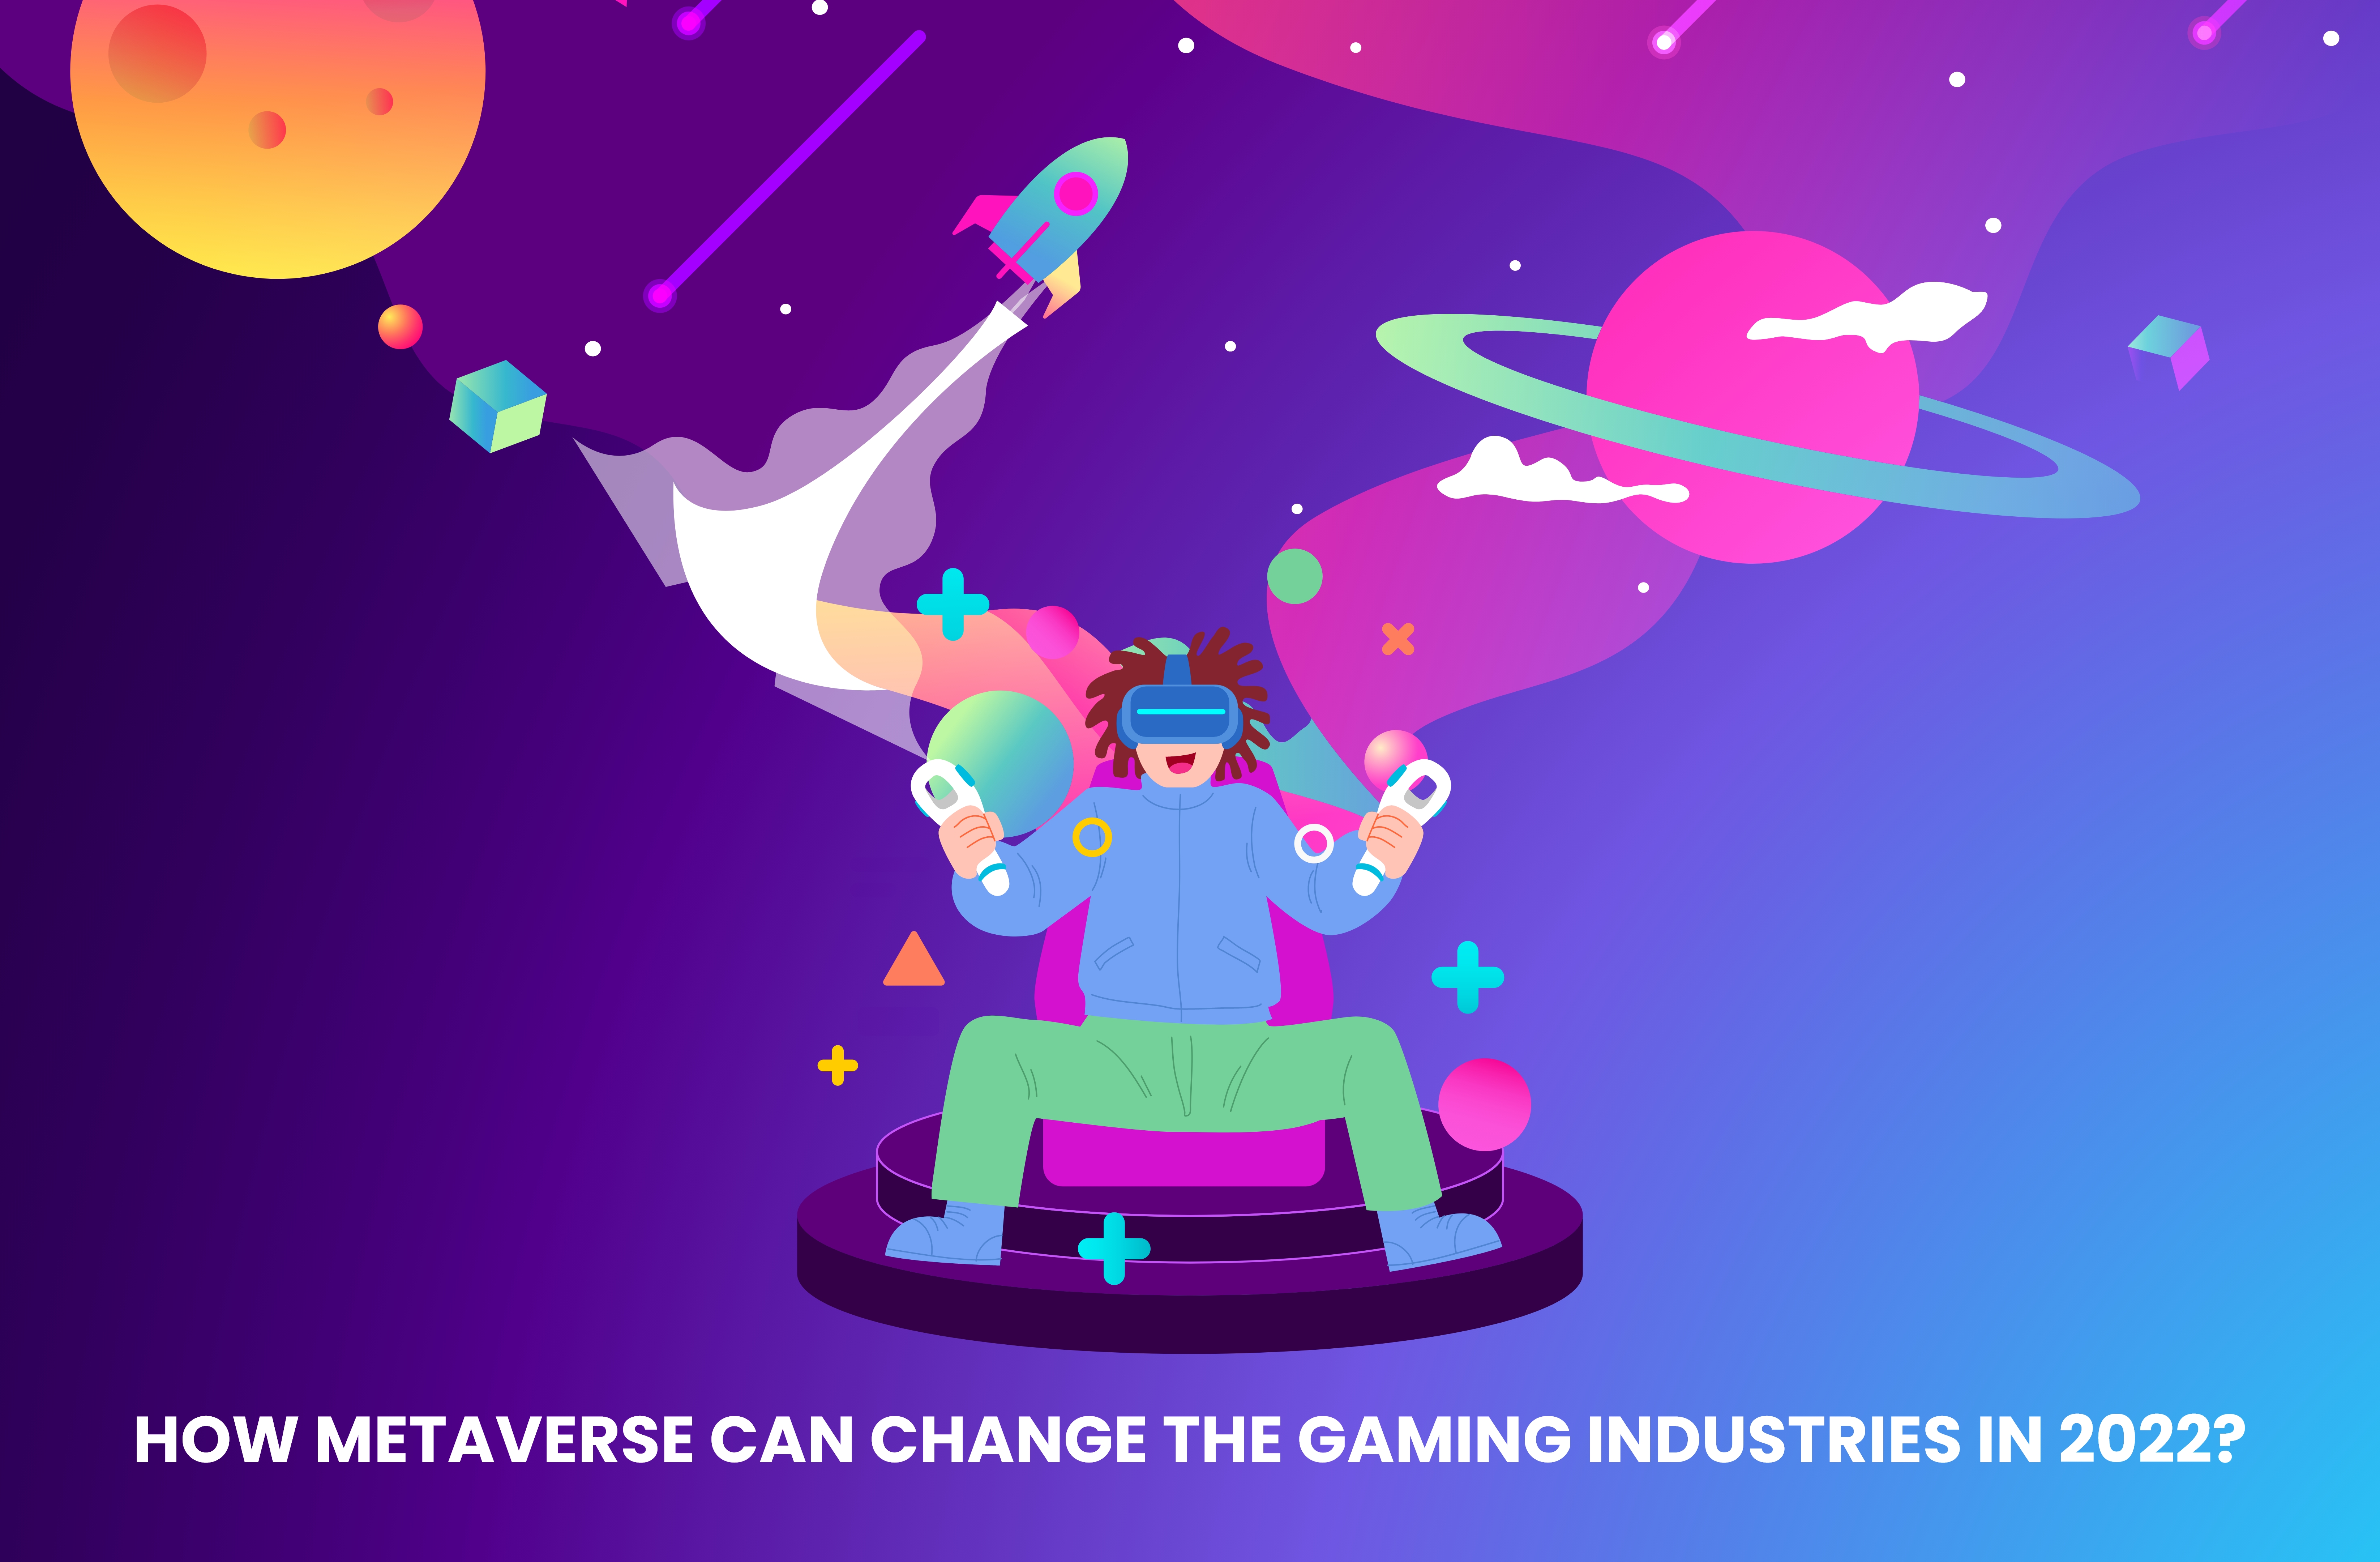 How Metaverse can Change the Gaming Industries in 2022?